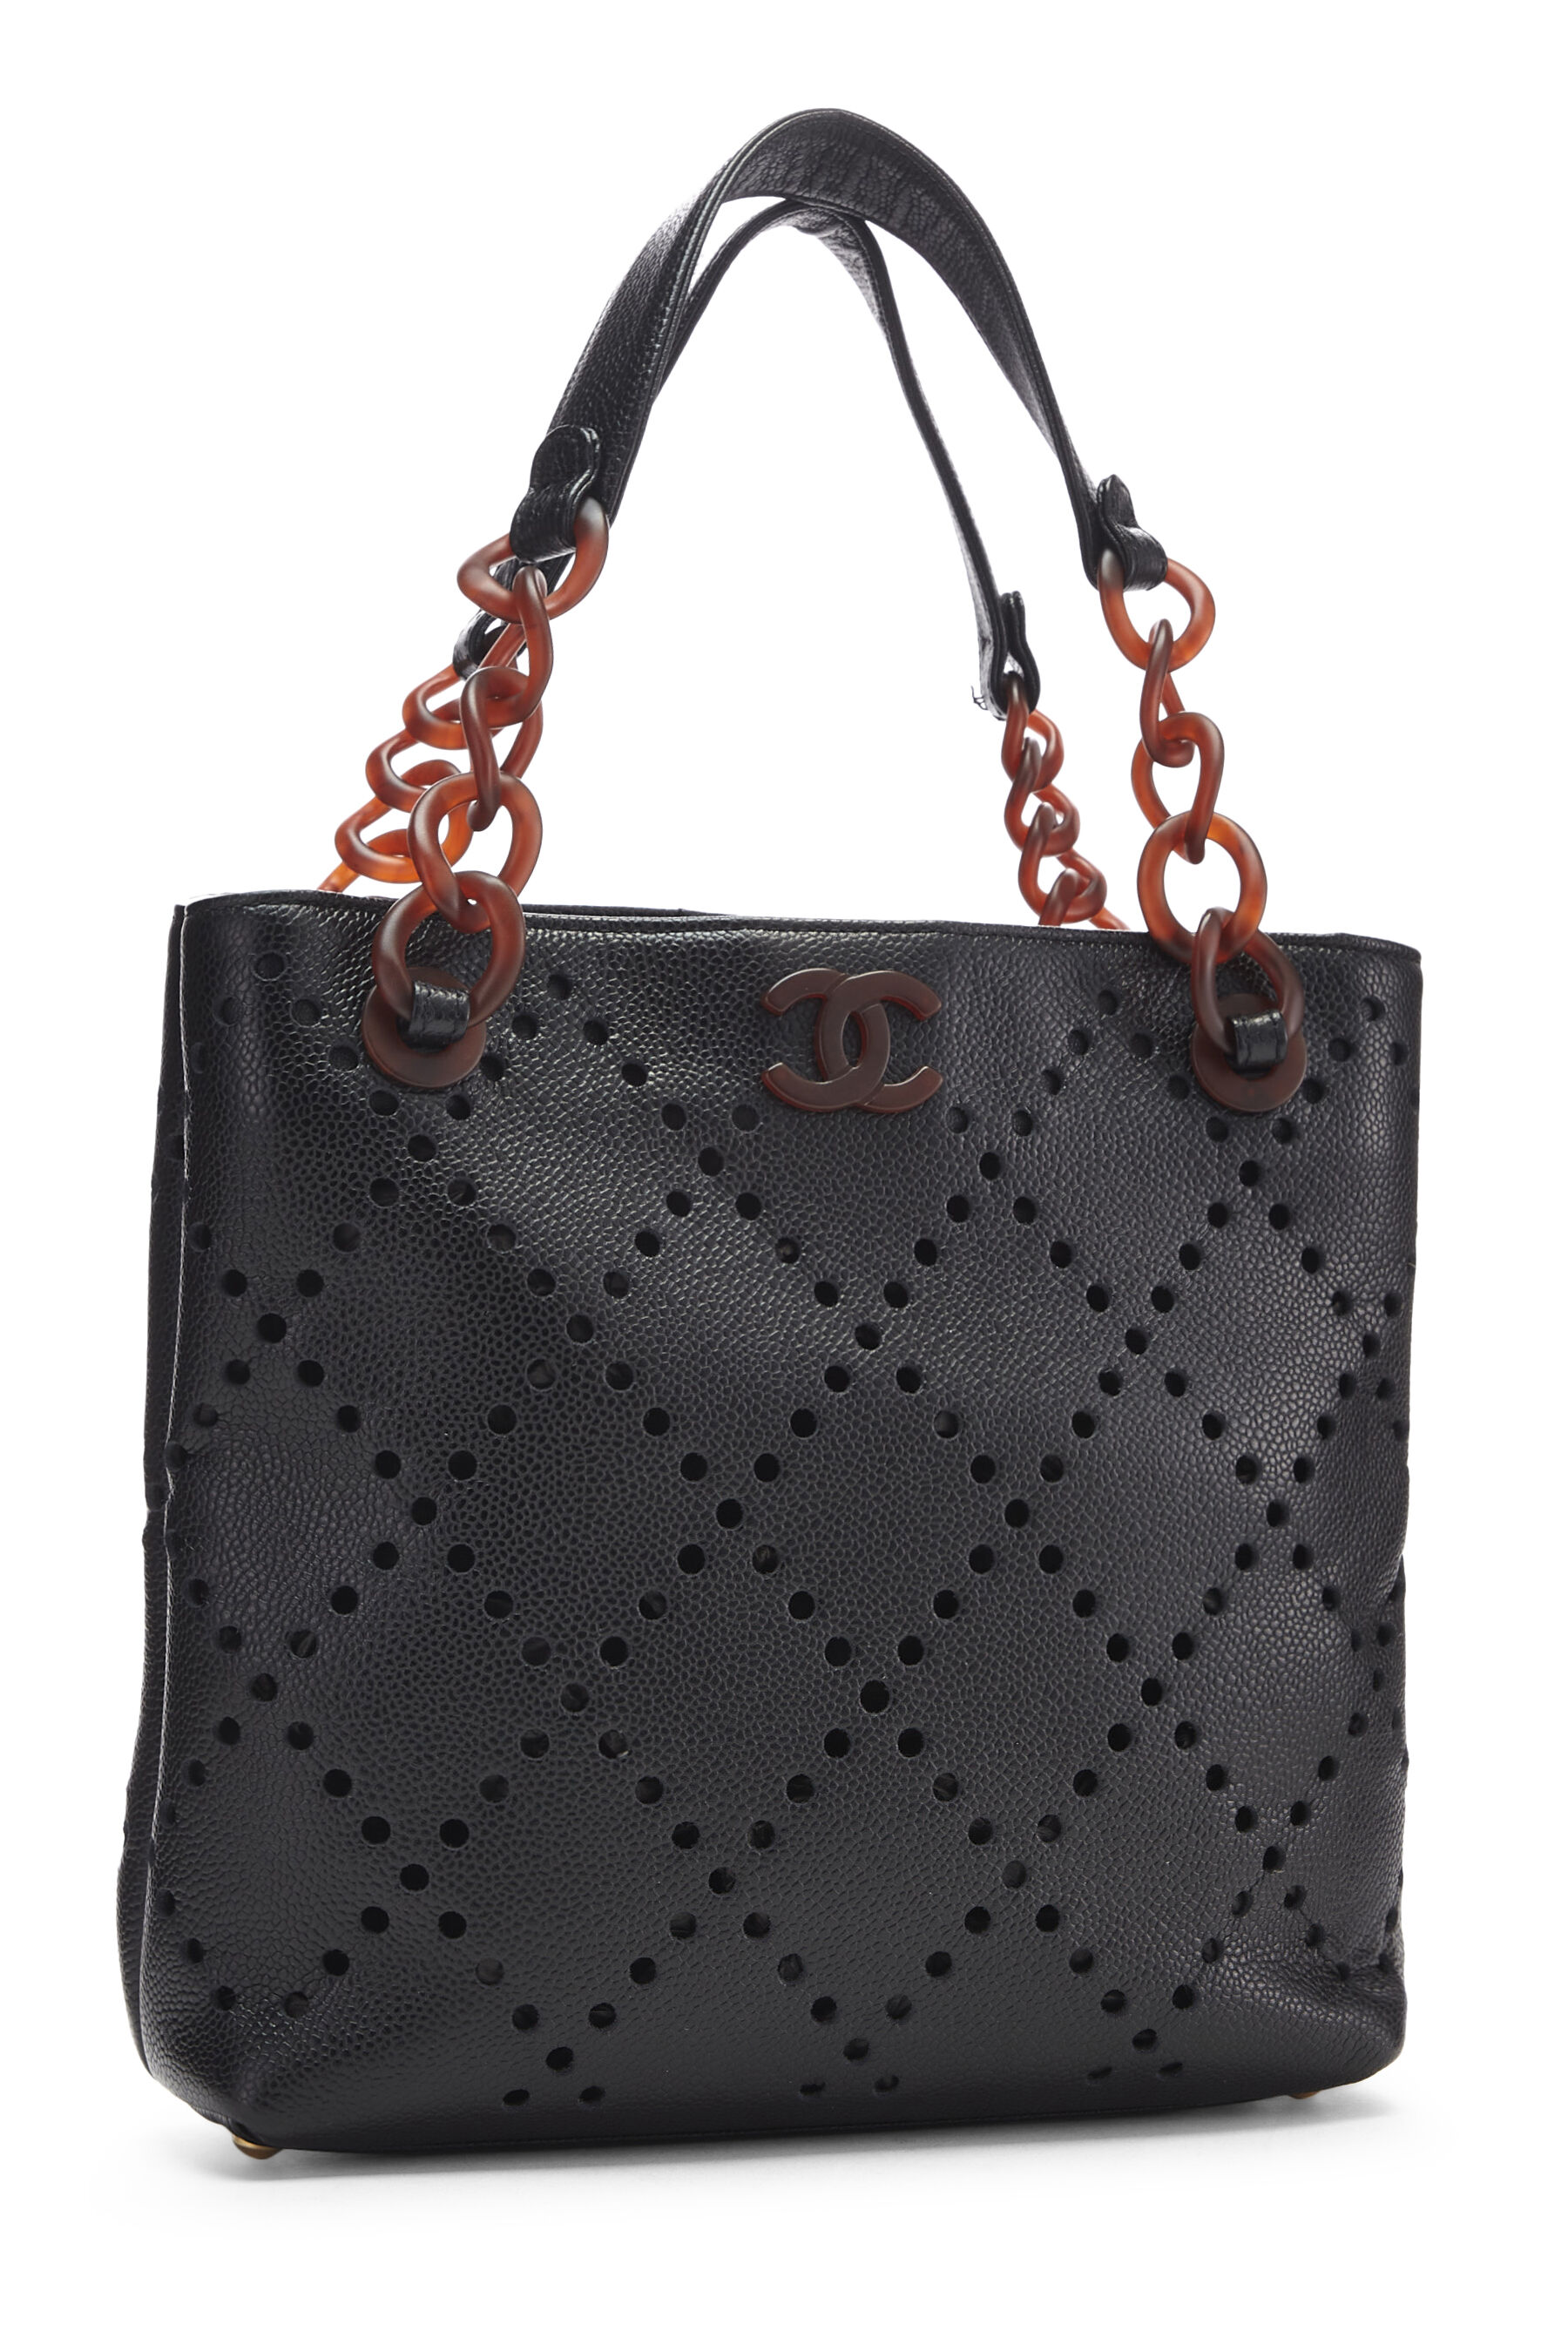 Chanel - Black Perforated Leather Tote